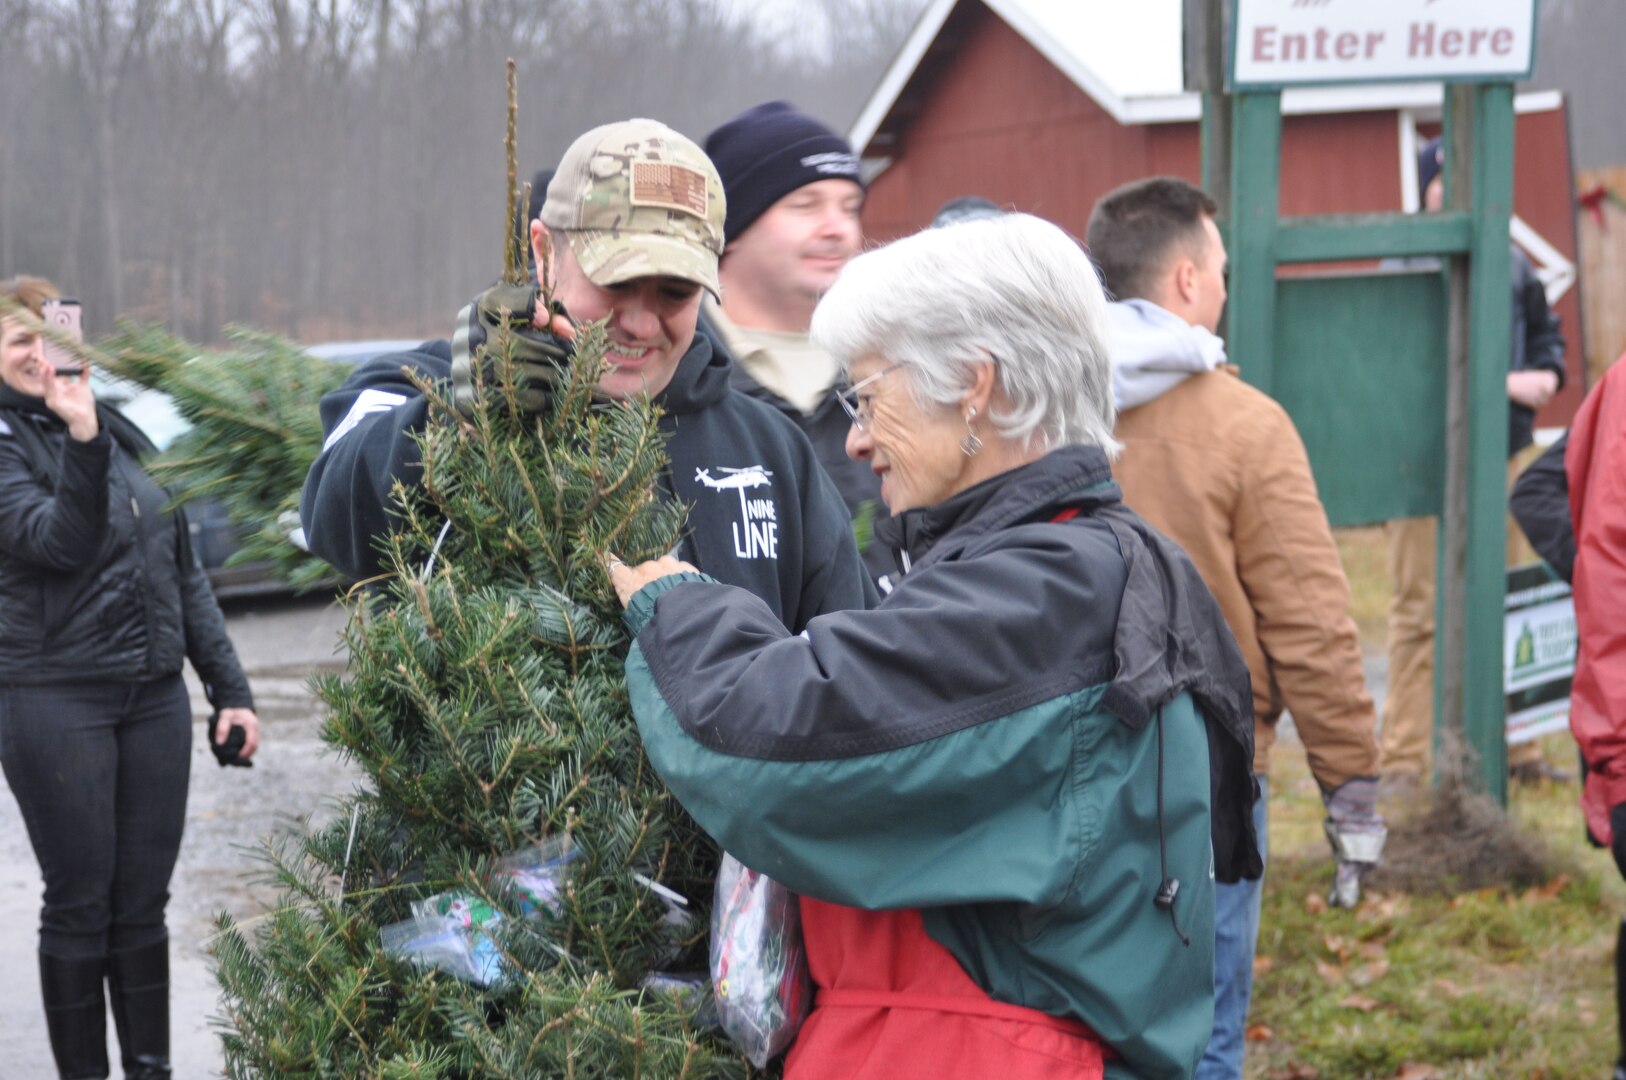 U.S. Air Force Master Sgt. Kyle Defeo helps Sally Ellms pack holiday ornaments and wishes into a Christmas Tree during the loading of donated trees November 29, 2016 in support of Trees for Troops at Ellms Tree Farm in Ballston Spa, N.Y. More than 20 Airmen from the New York Air National Guard’s 109th Airlift Wing based in Scotia, N.Y., helped ship some 130 holiday trees with donated ornaments and holiday wishes.